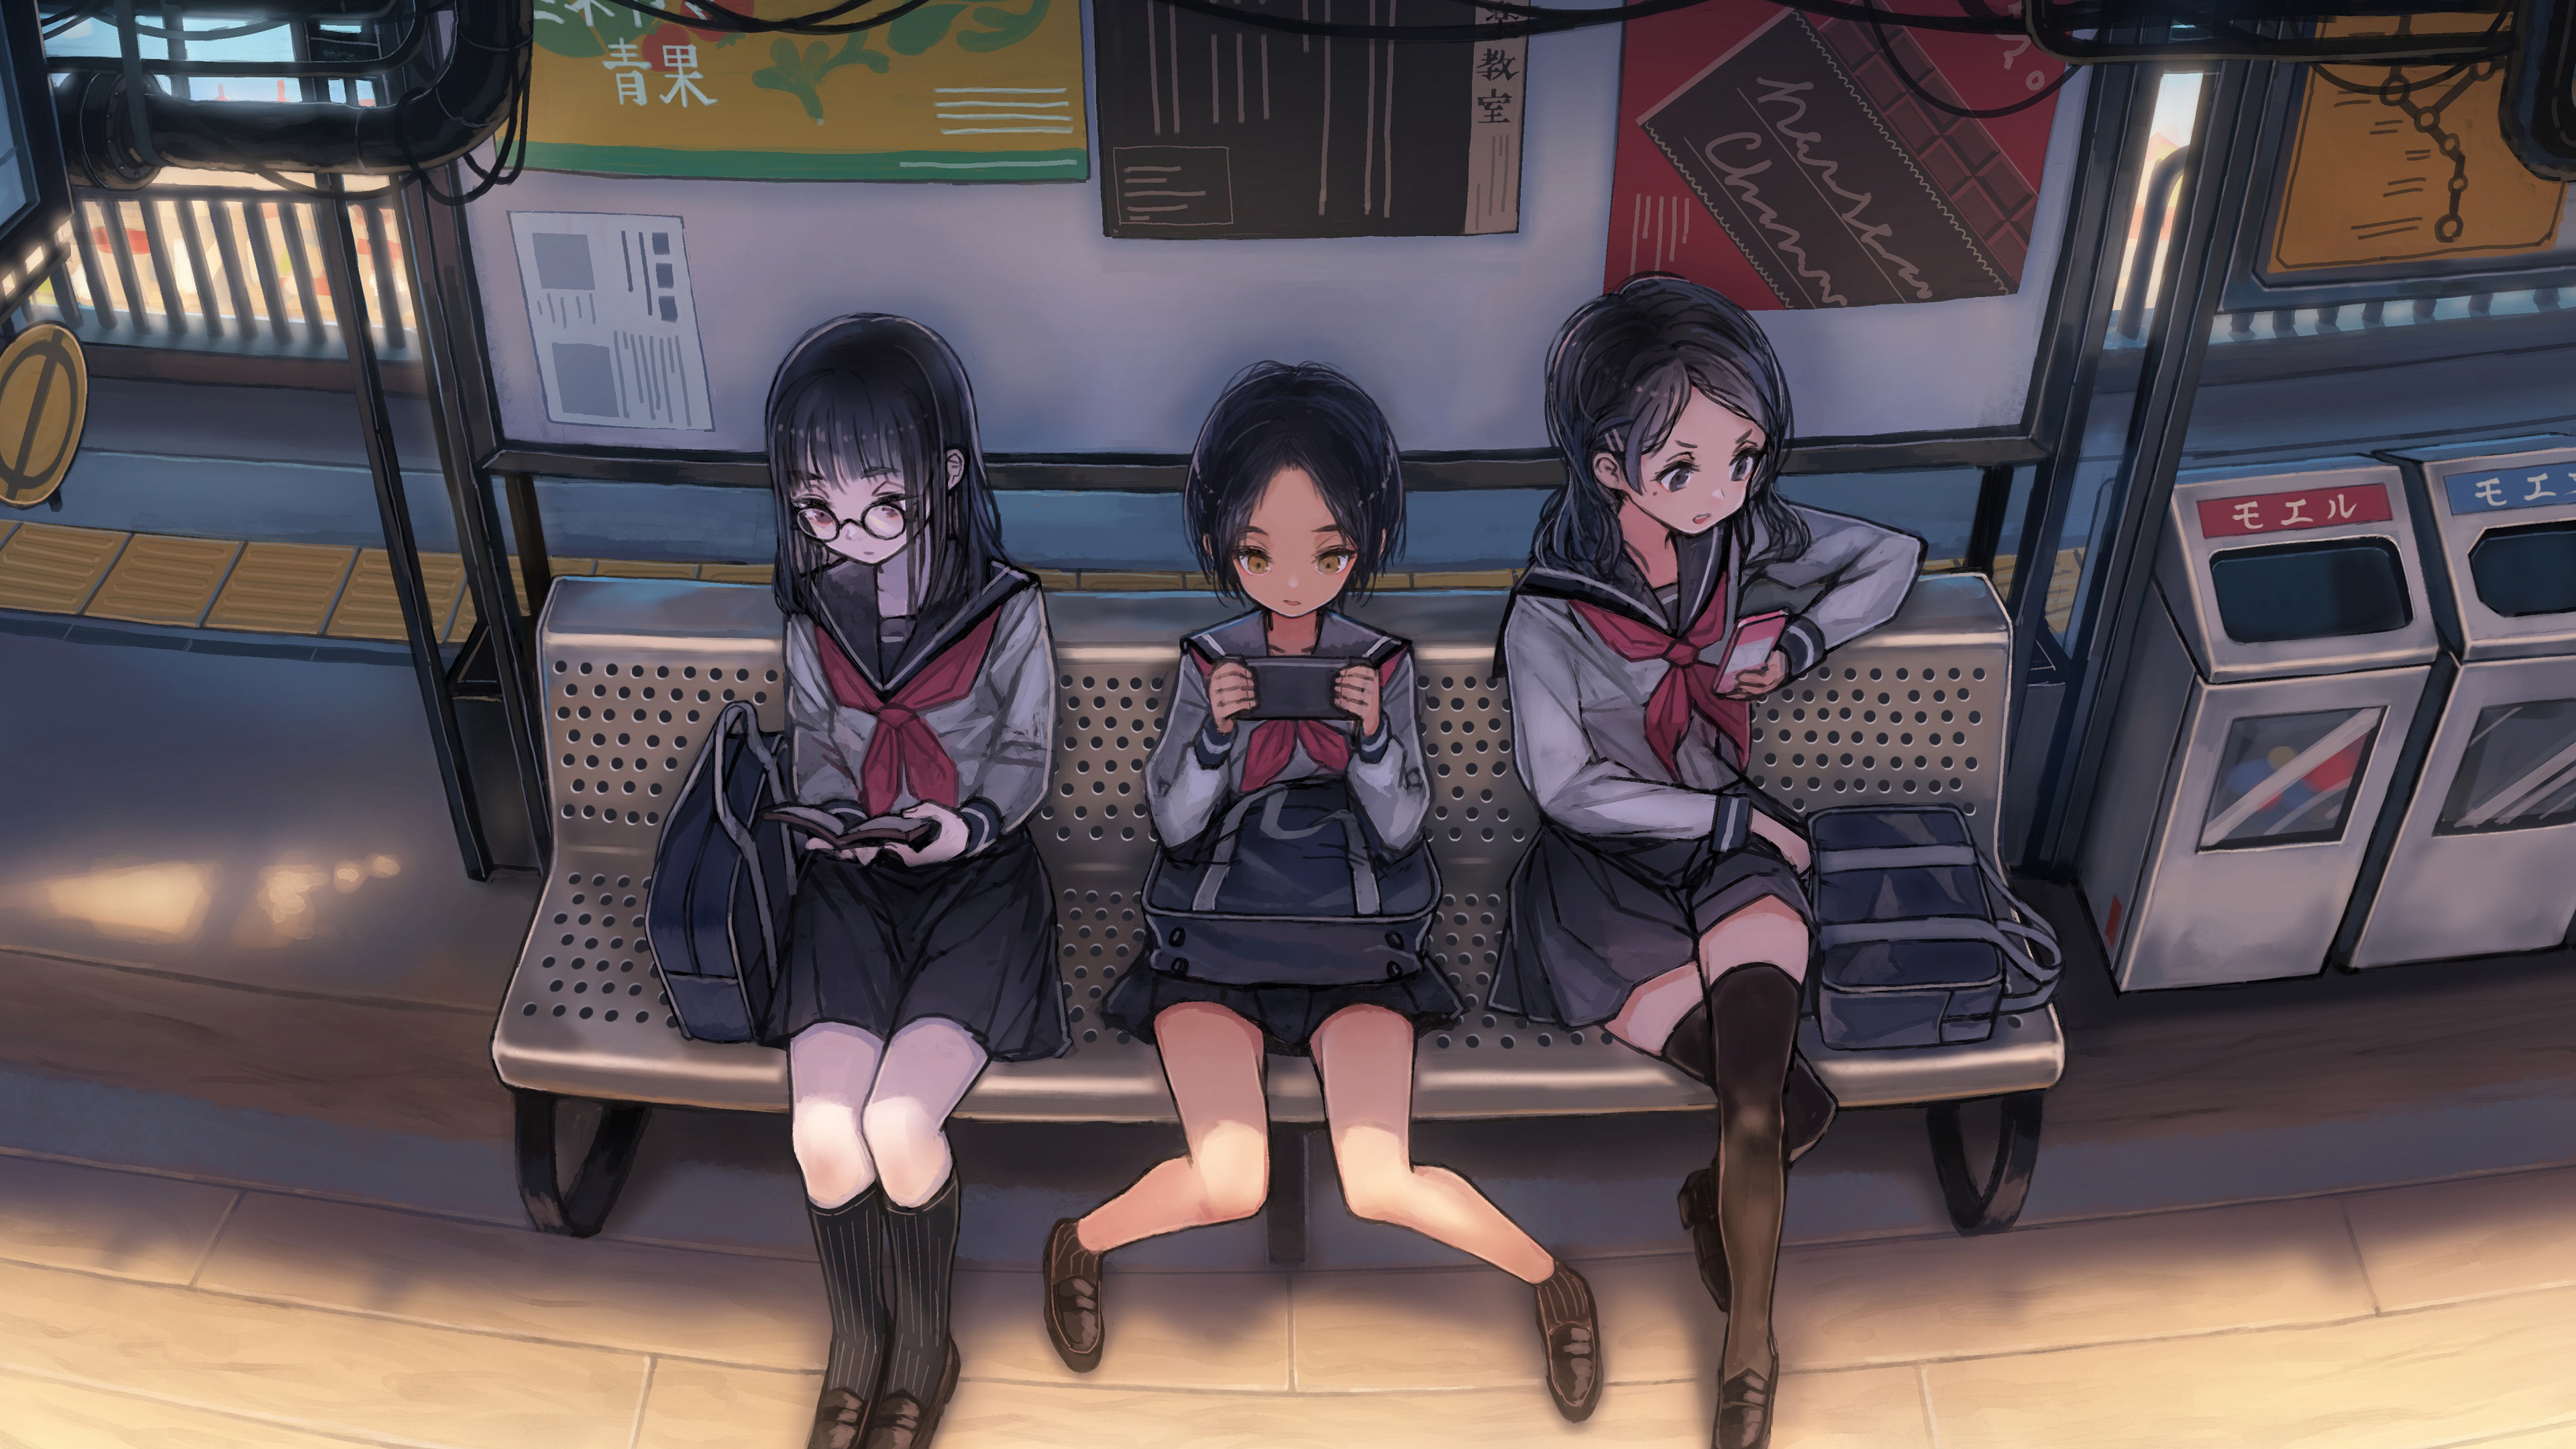 Anime Schoool Girls On Phones Waiting For Bus 4k, HD Anime, 4k Wallpapers,  Images, Backgrounds, Photos and Pictures